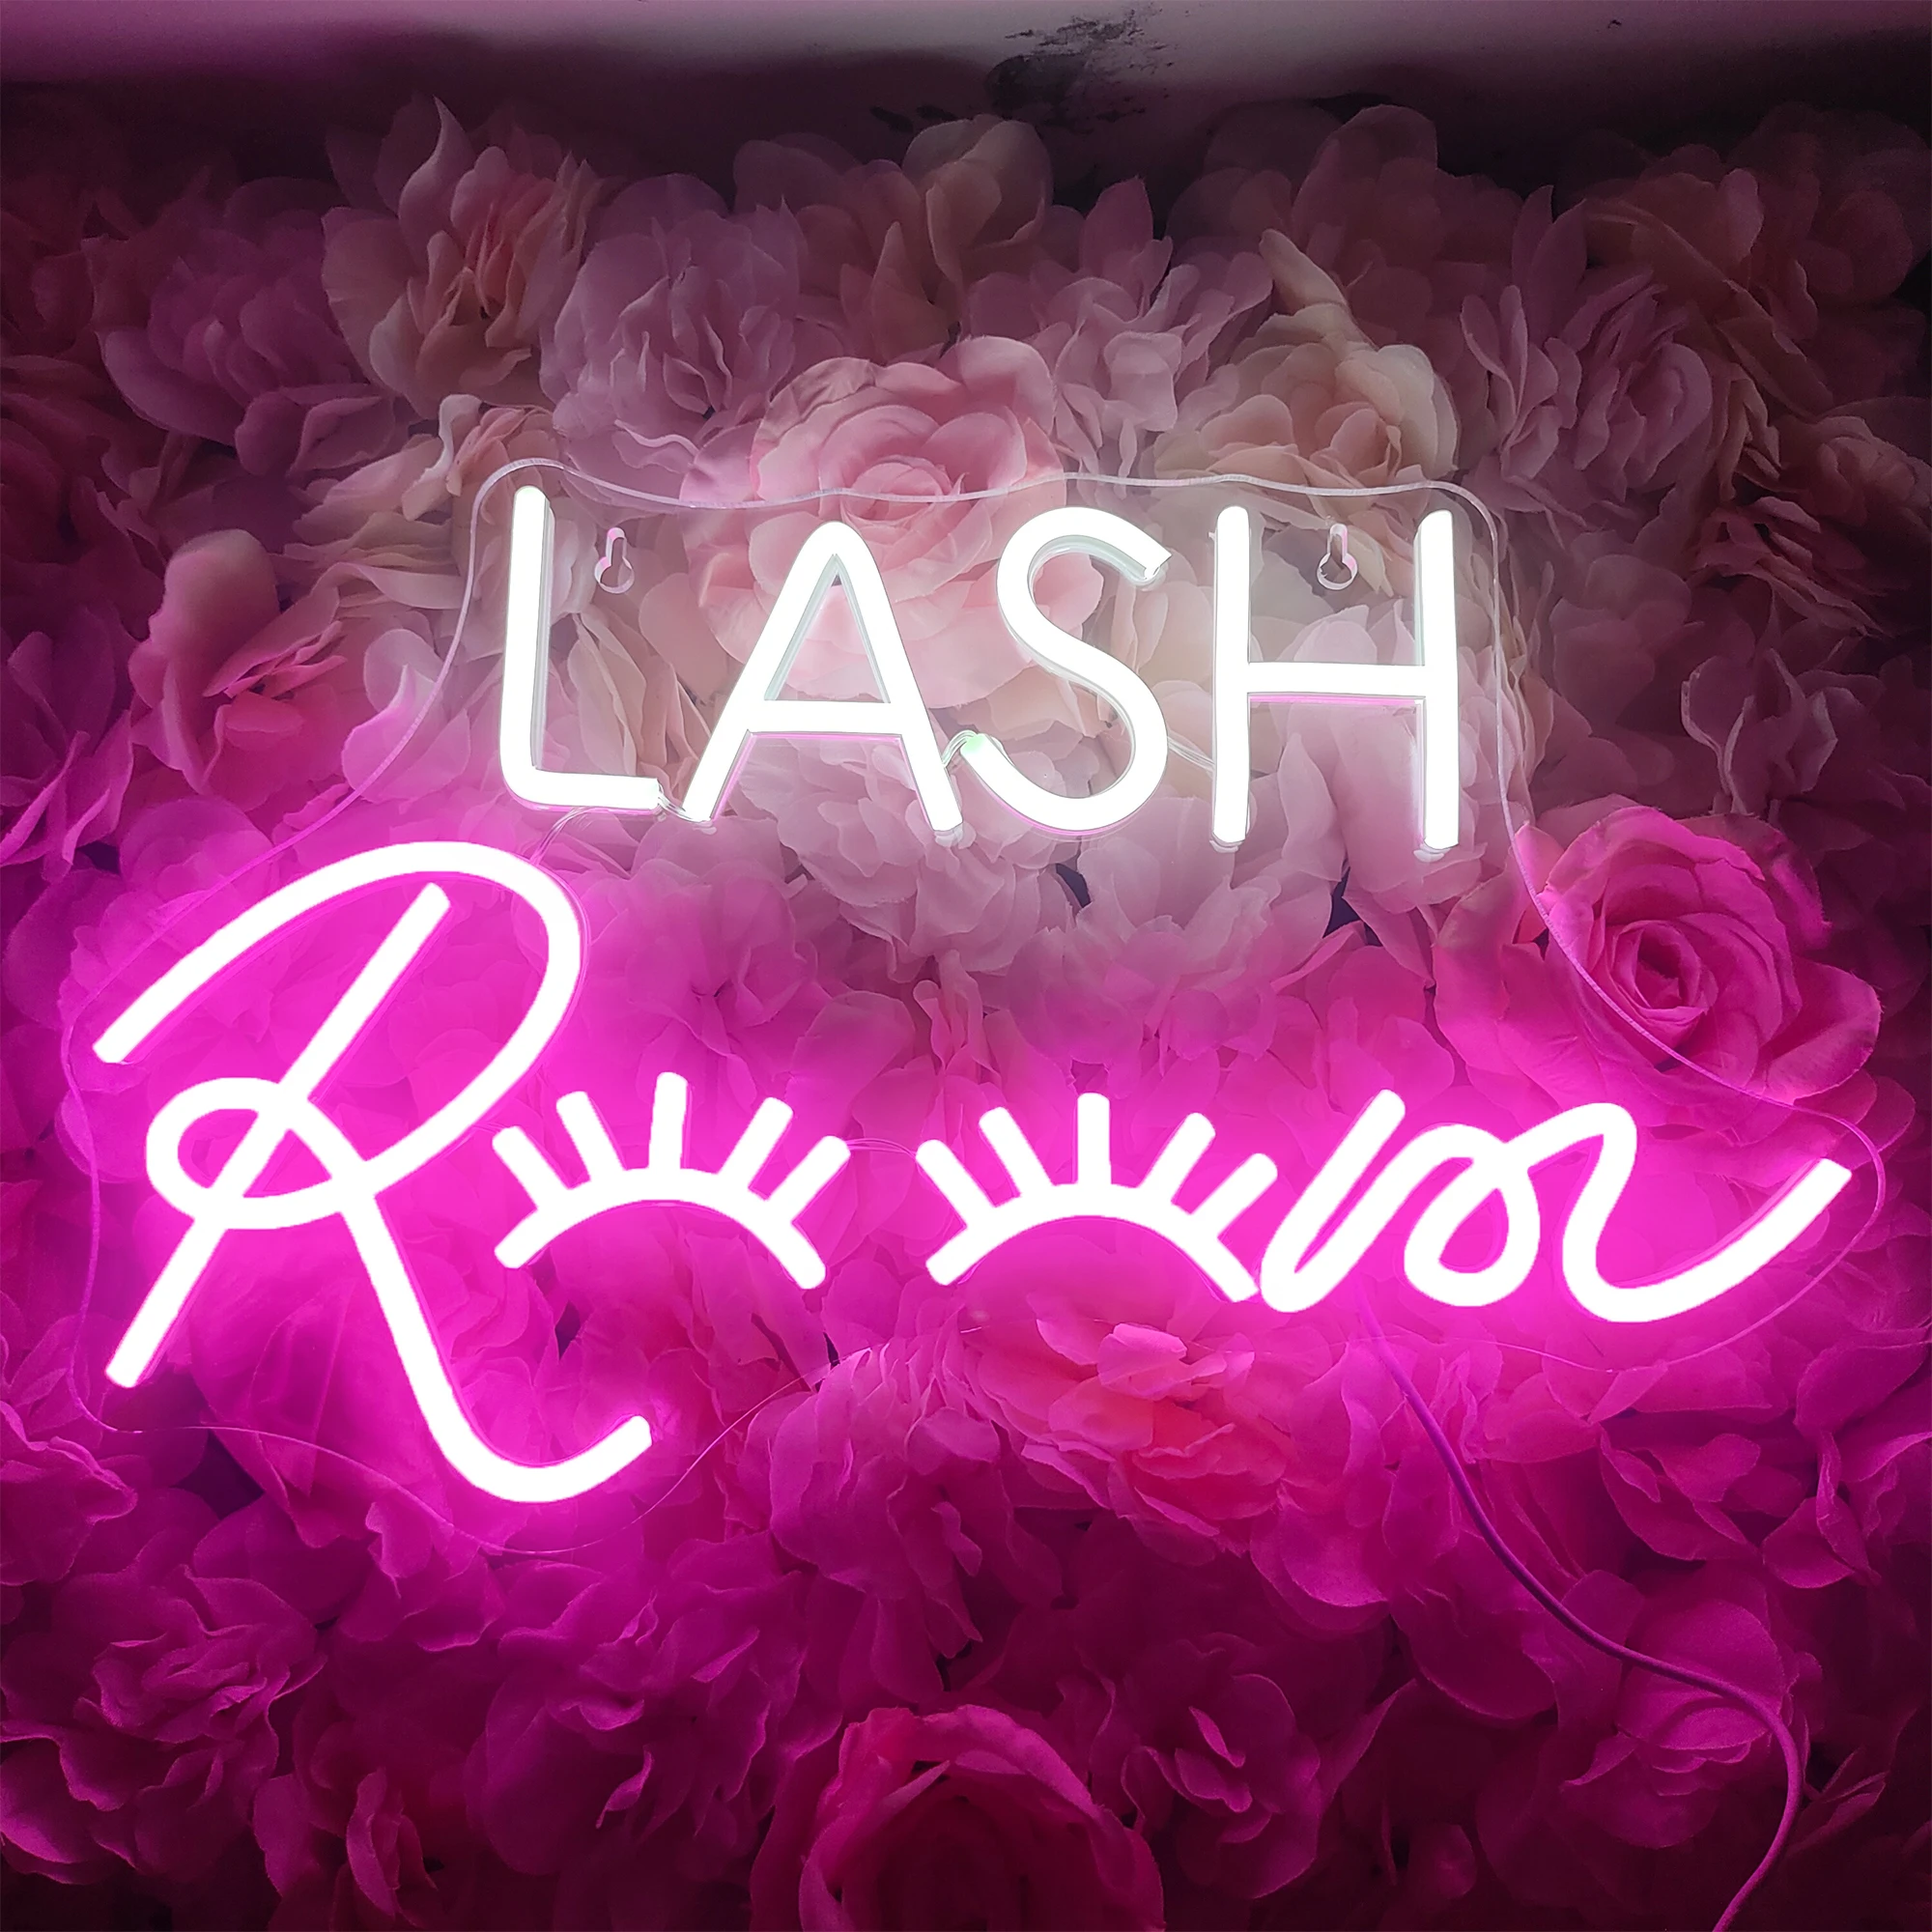 LED Neon Sign Lights LASH Room Decoration Wall Art Neon Light Beauty Salon Decor Pink Neon LED Sign Business Signboard LED Light chair square outdoor table decoration restaurant sedentary desk table supplies picnic professional salon de jardin coffee tables